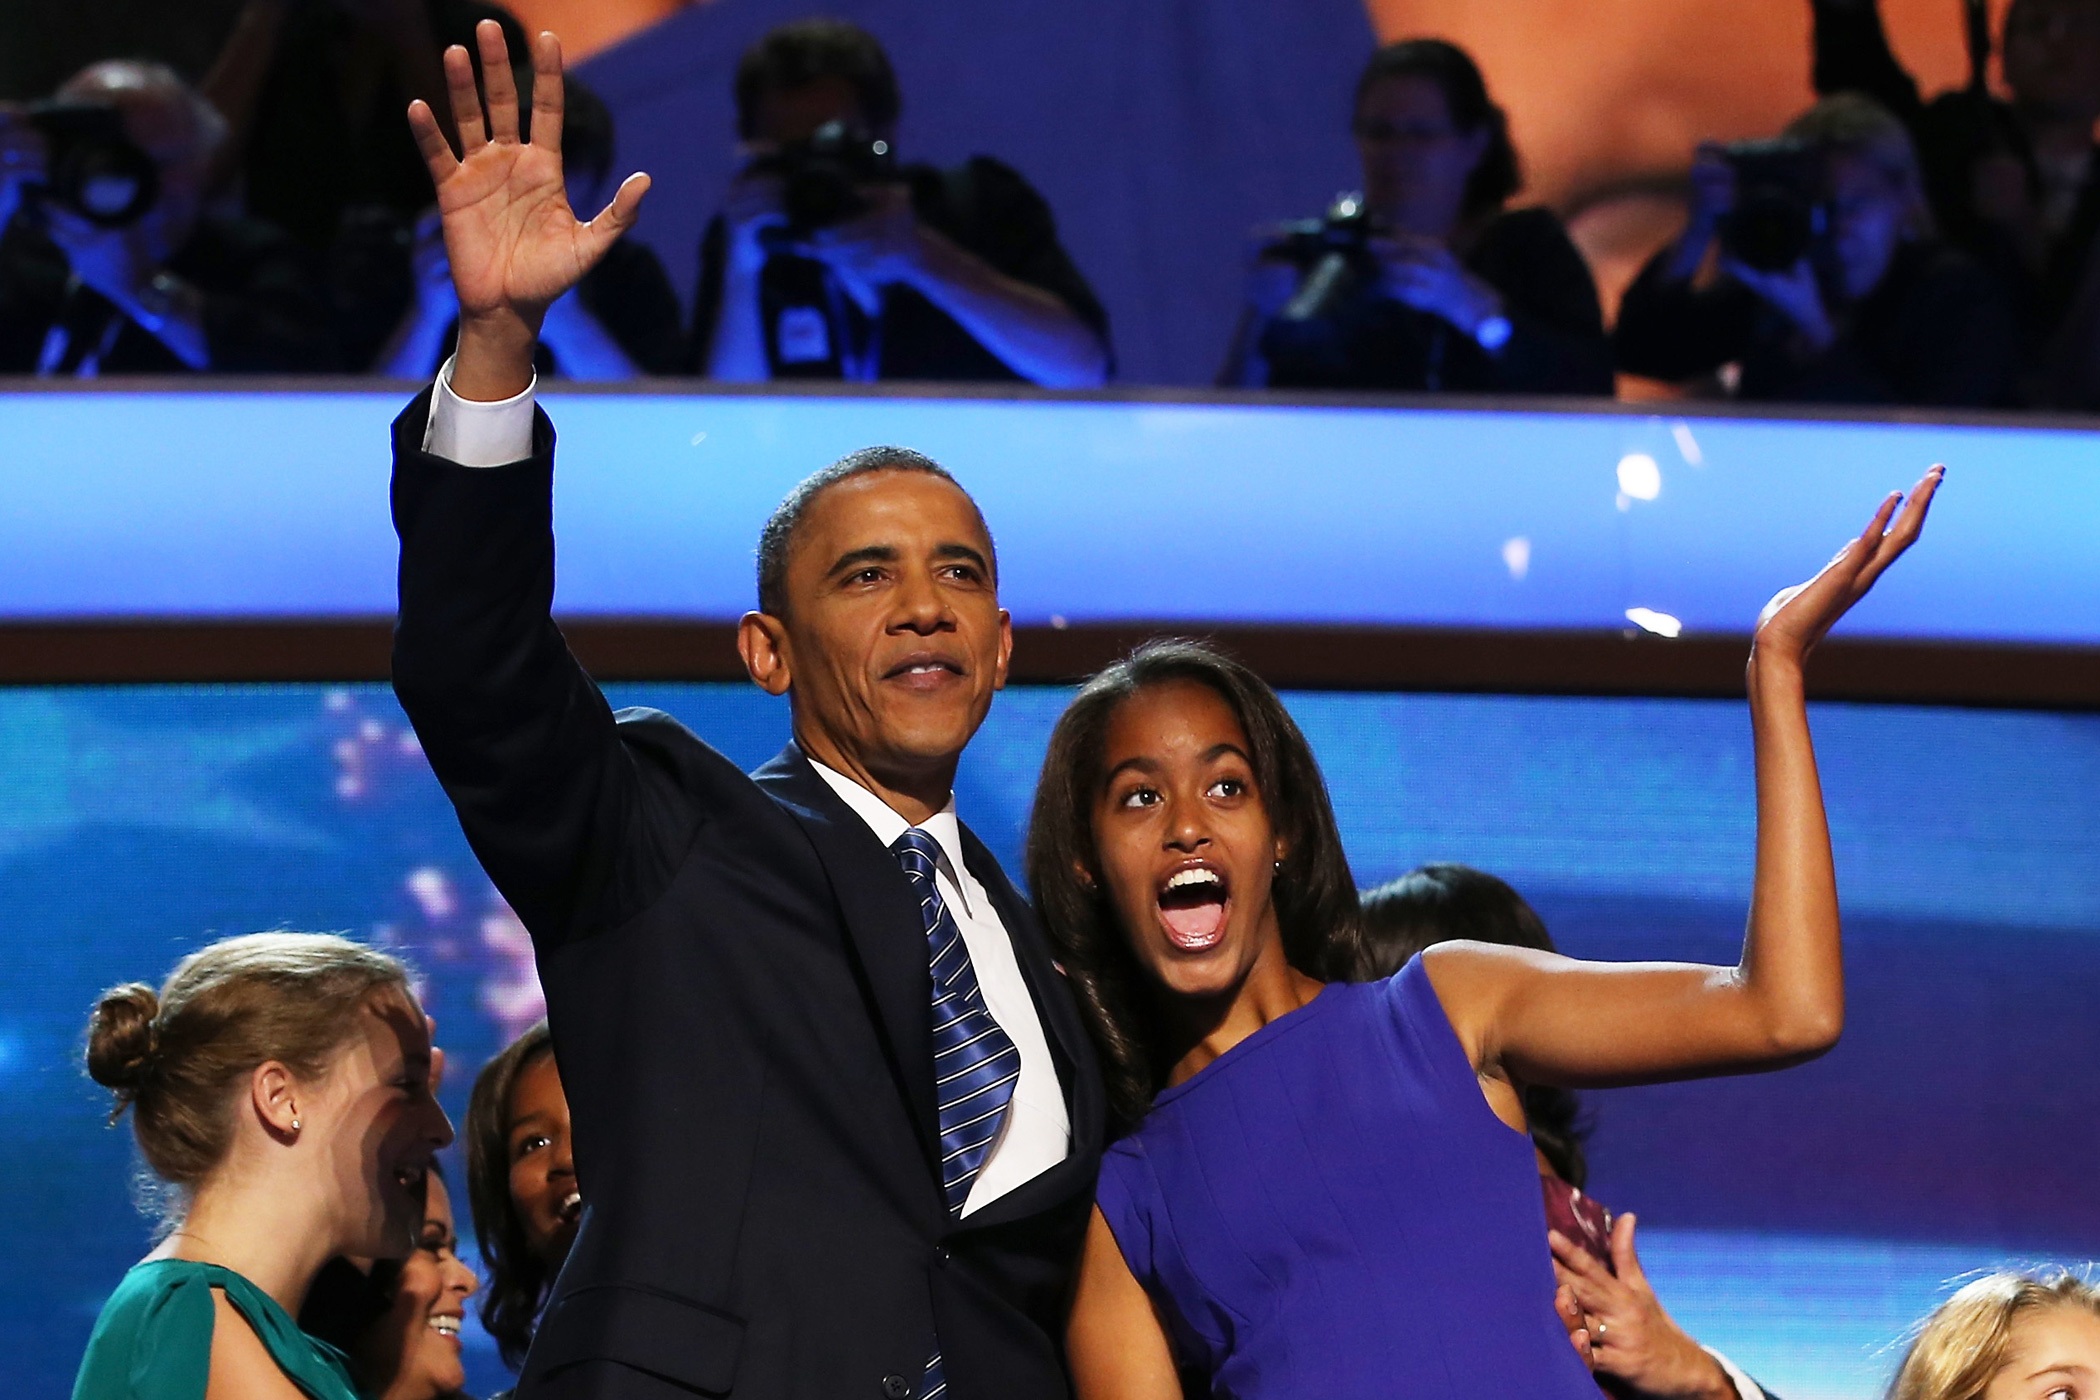 Sept. 6, 2012 President Barack Obama waves on stage with daughter Malia Obama after accepting the nomination during the final day of the Democratic National Convention at Time Warner Cable Arena in Charlotte, N.C.